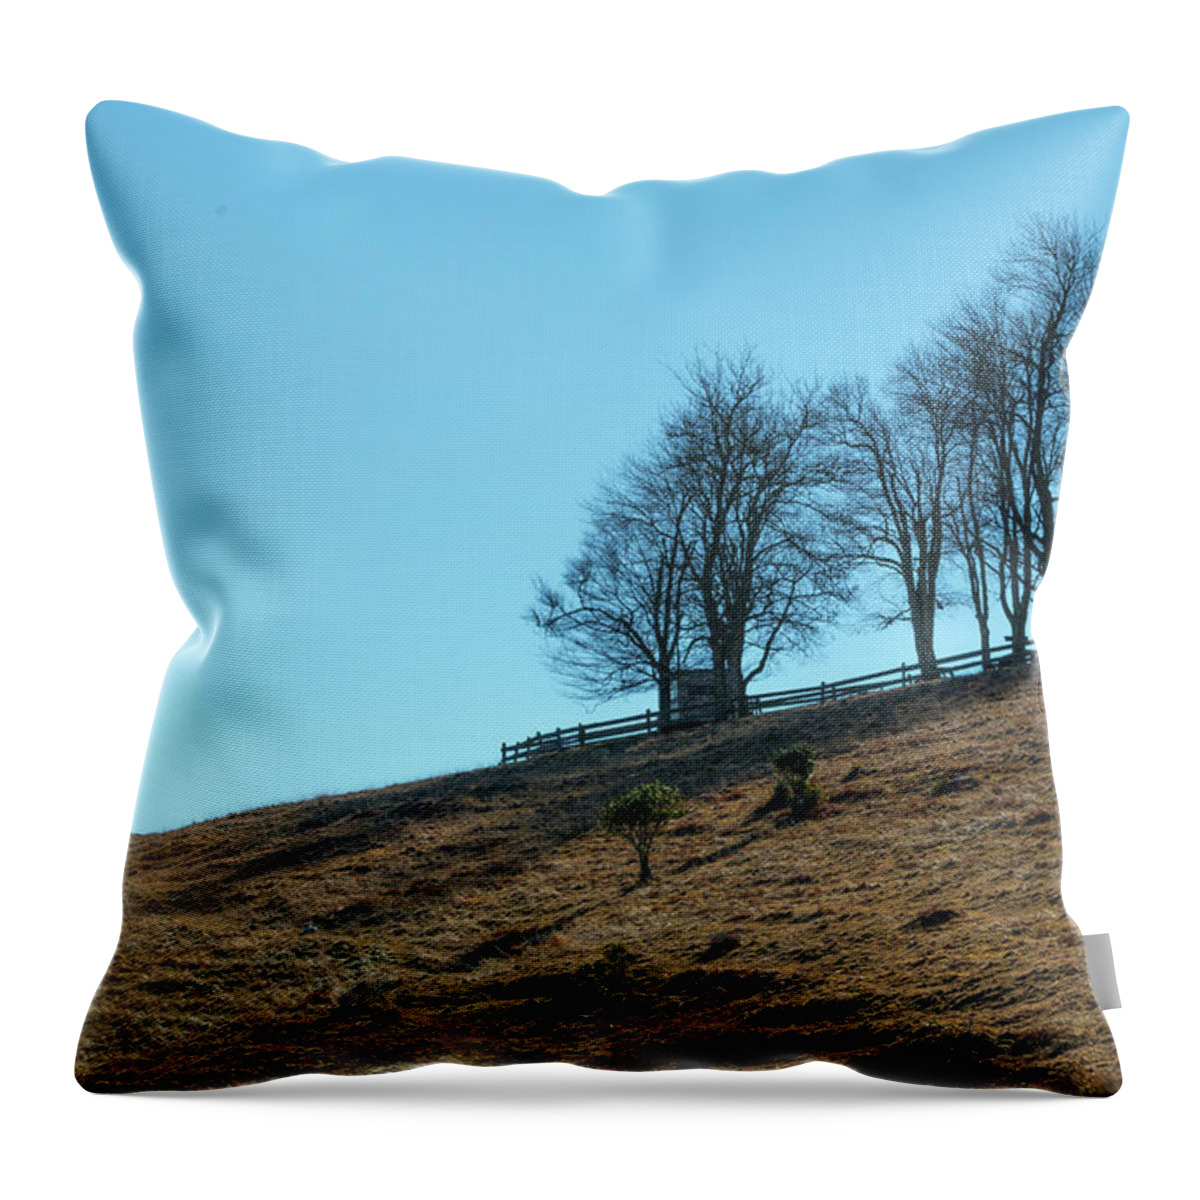 Windswept Throw Pillow featuring the photograph Windswept Trees - December 7 2016 by D K Wall